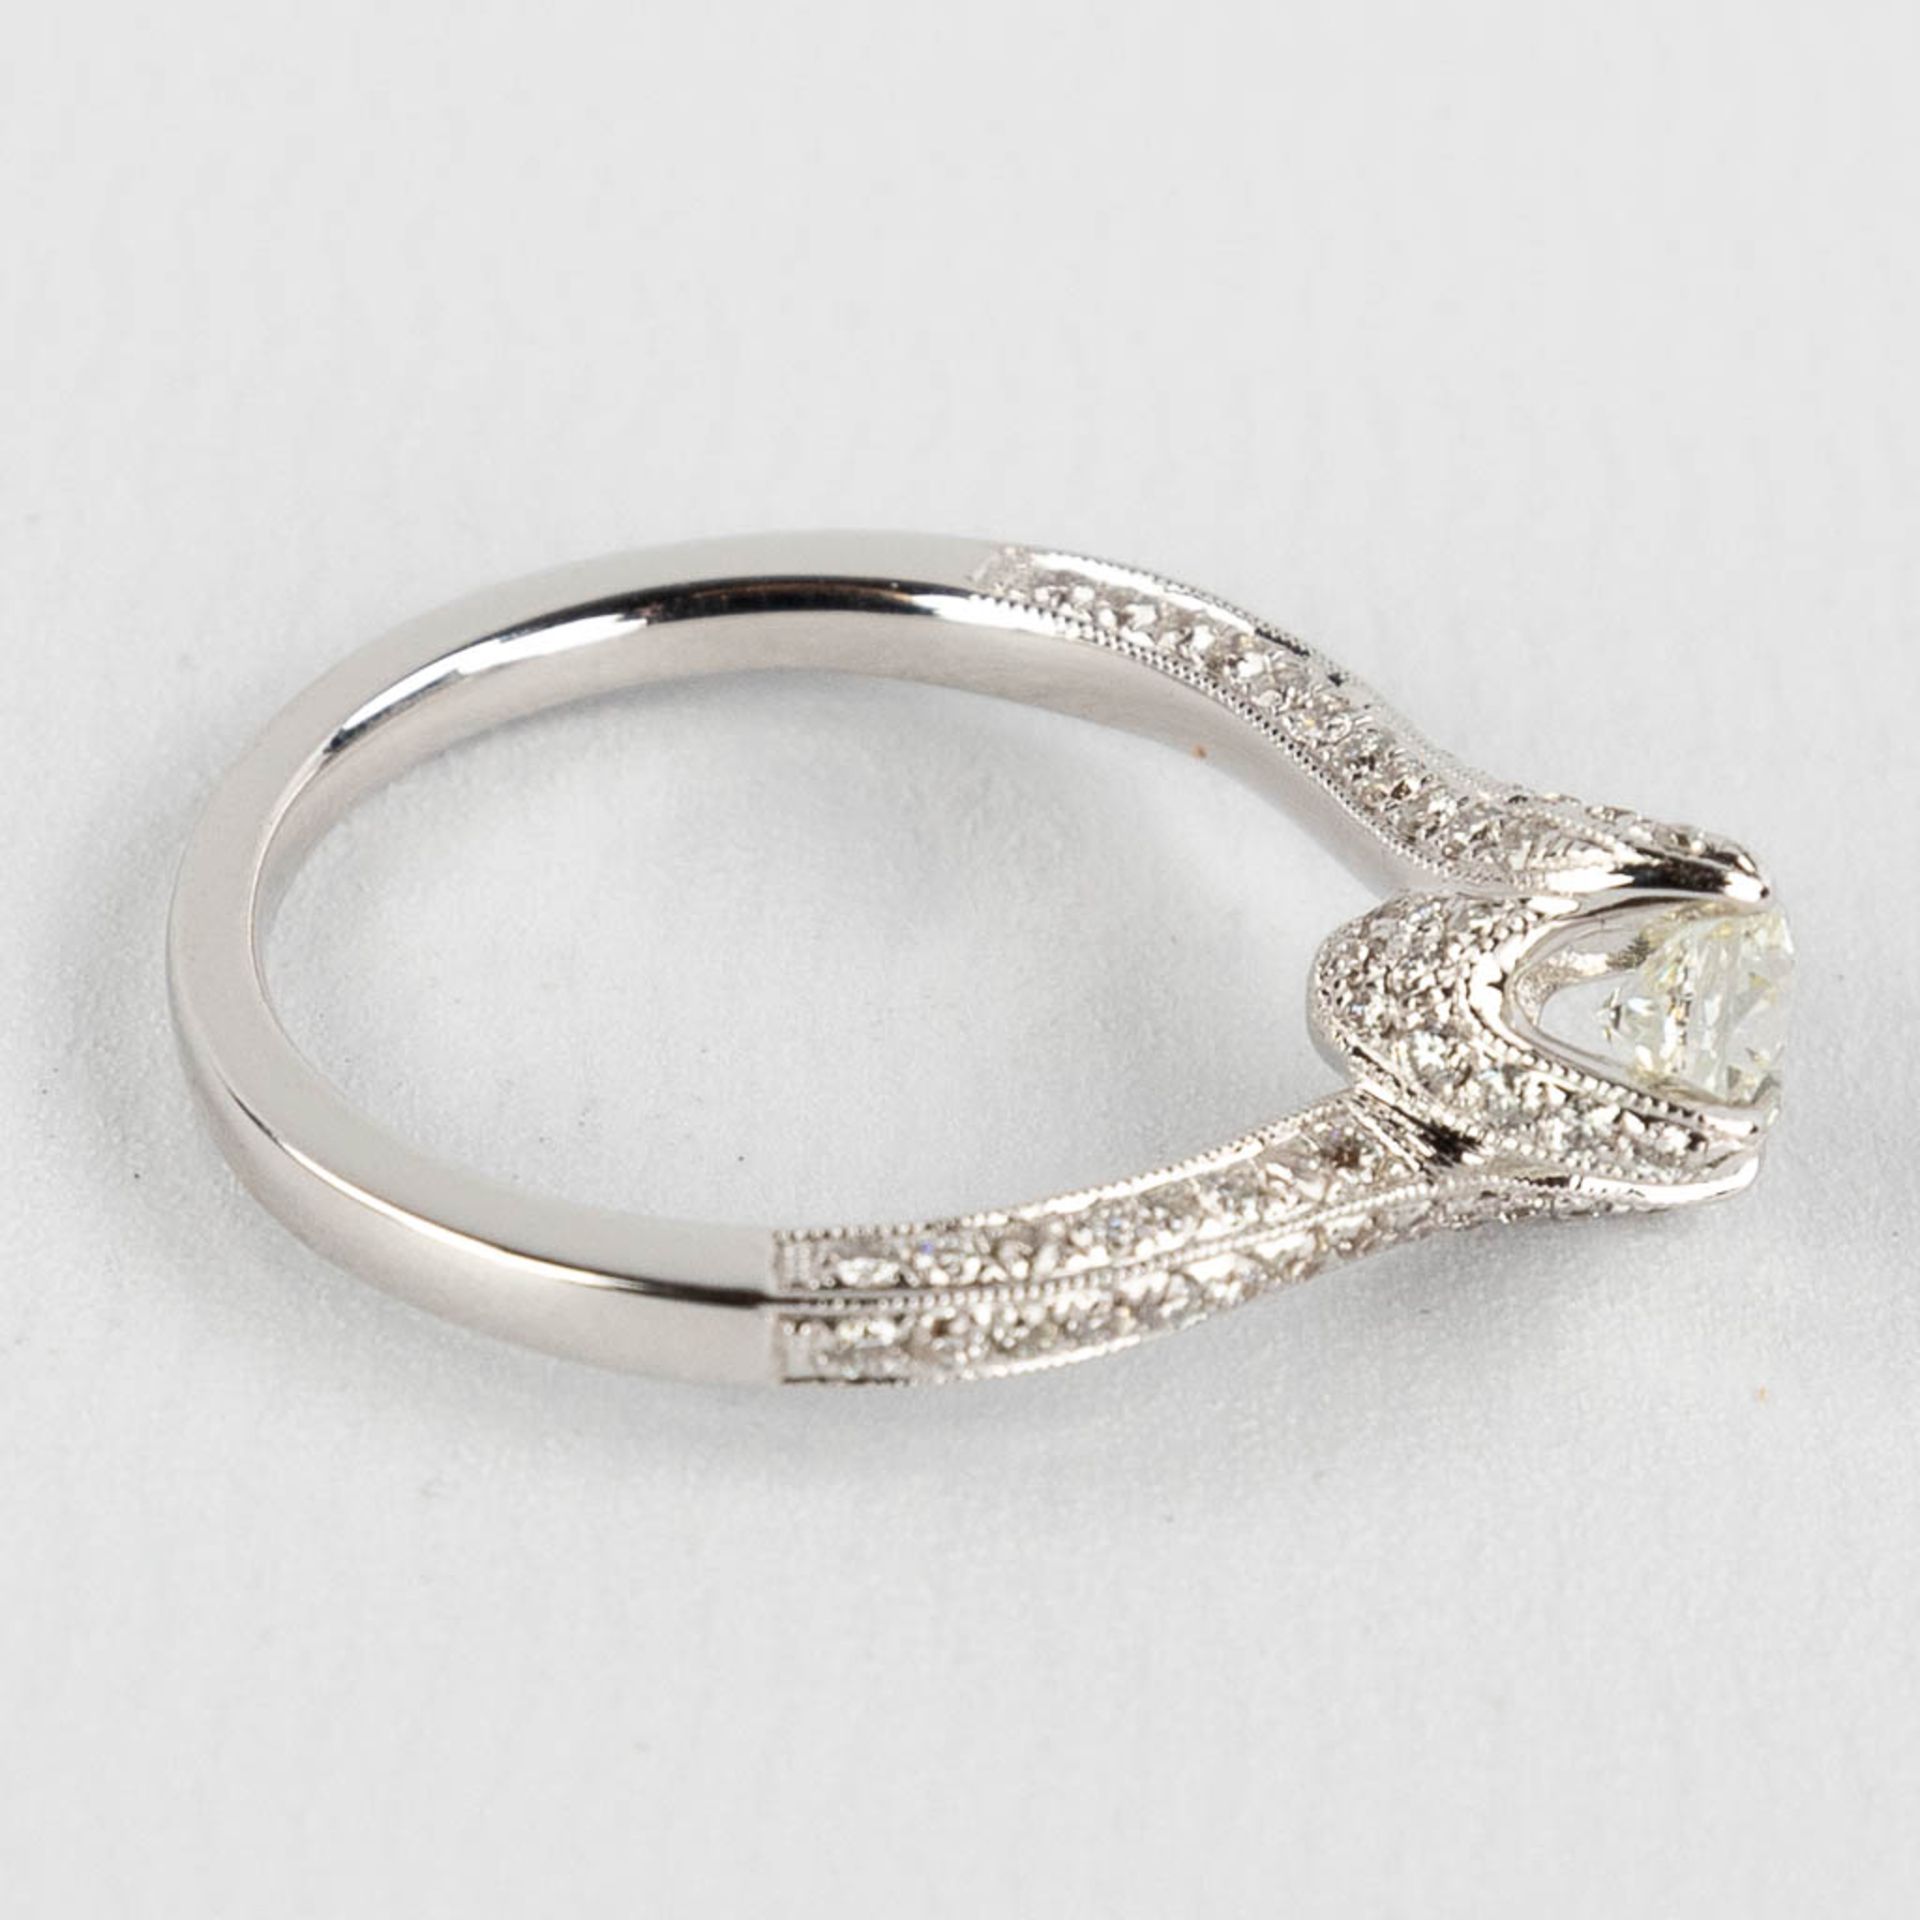 A ring, white gold with brilliant cut diamonds, central stone approximately 0,5ct, total appr. 0,53c - Image 4 of 10